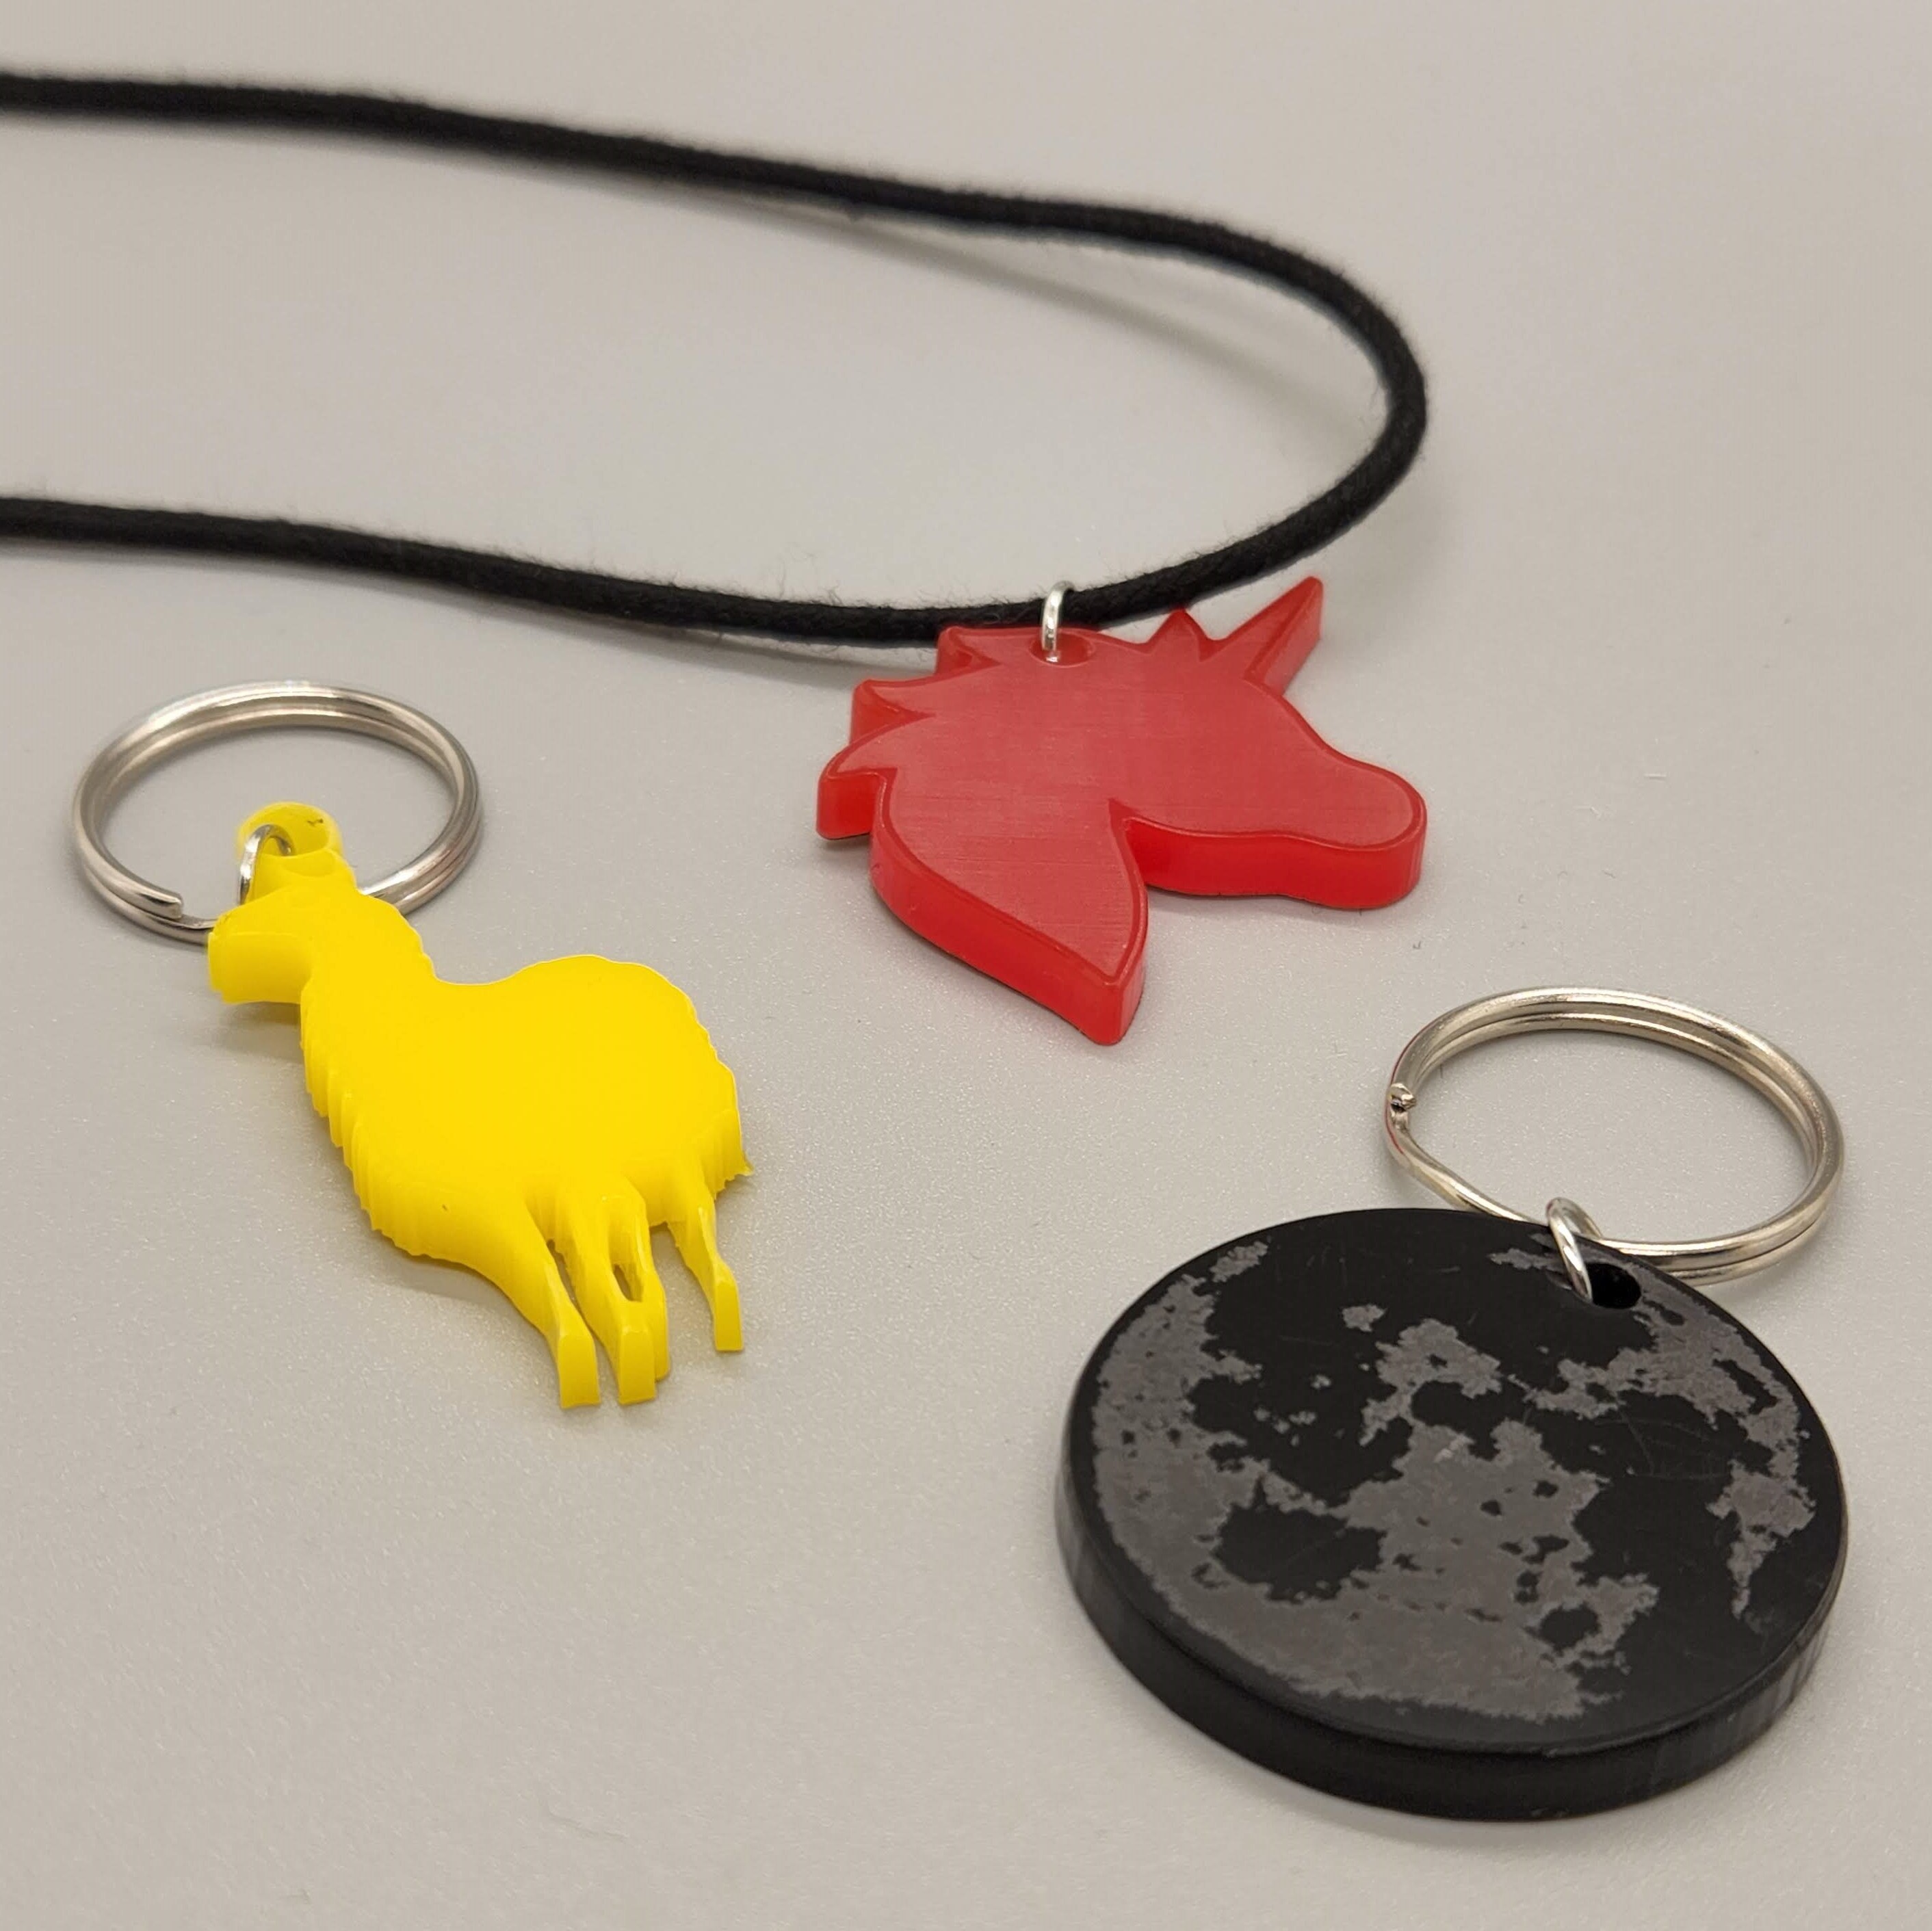 Acrylic charms made on the laser cutter